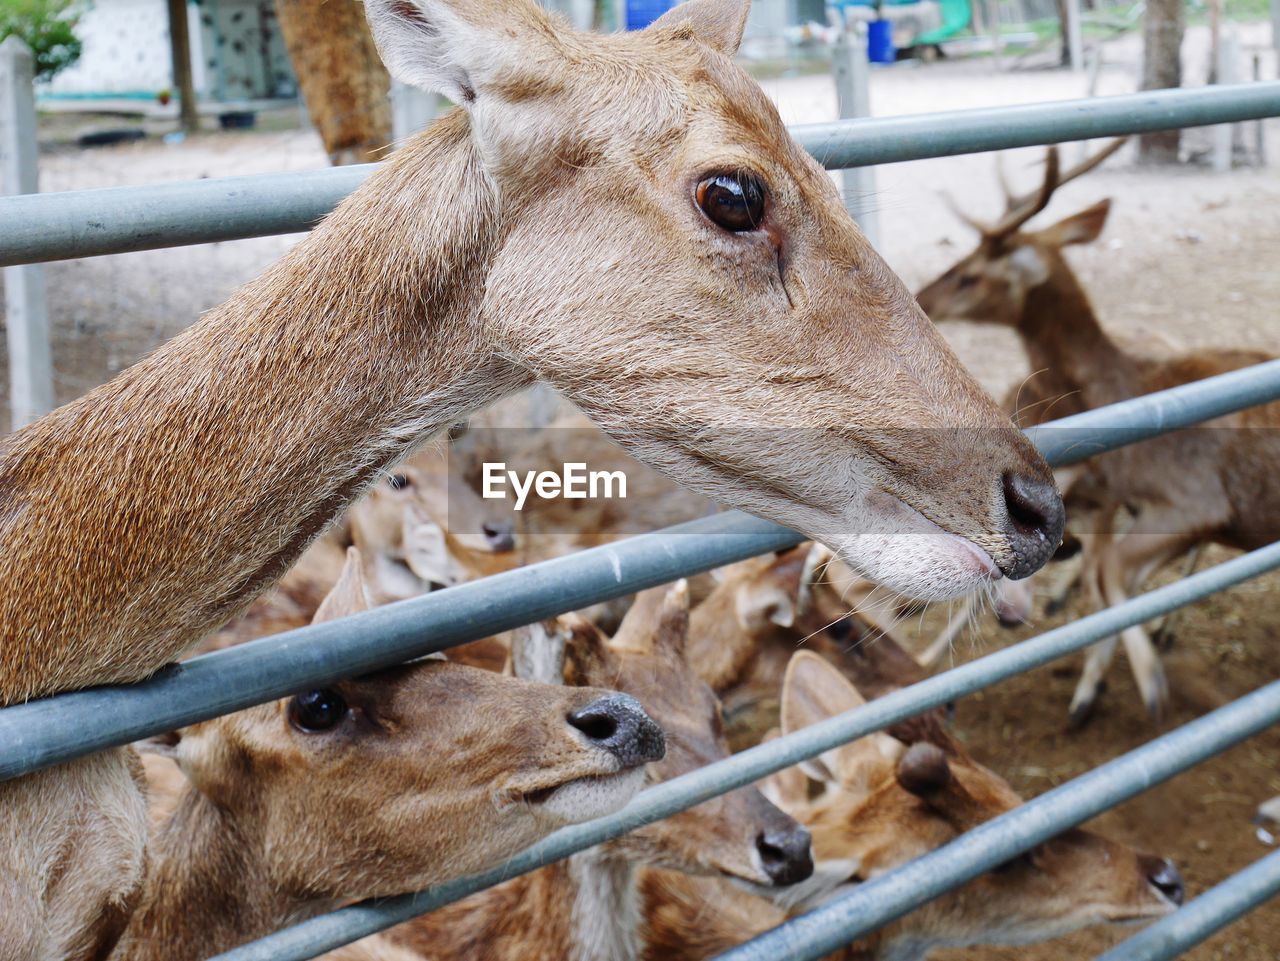 CLOSE-UP OF DEER IN A FARM